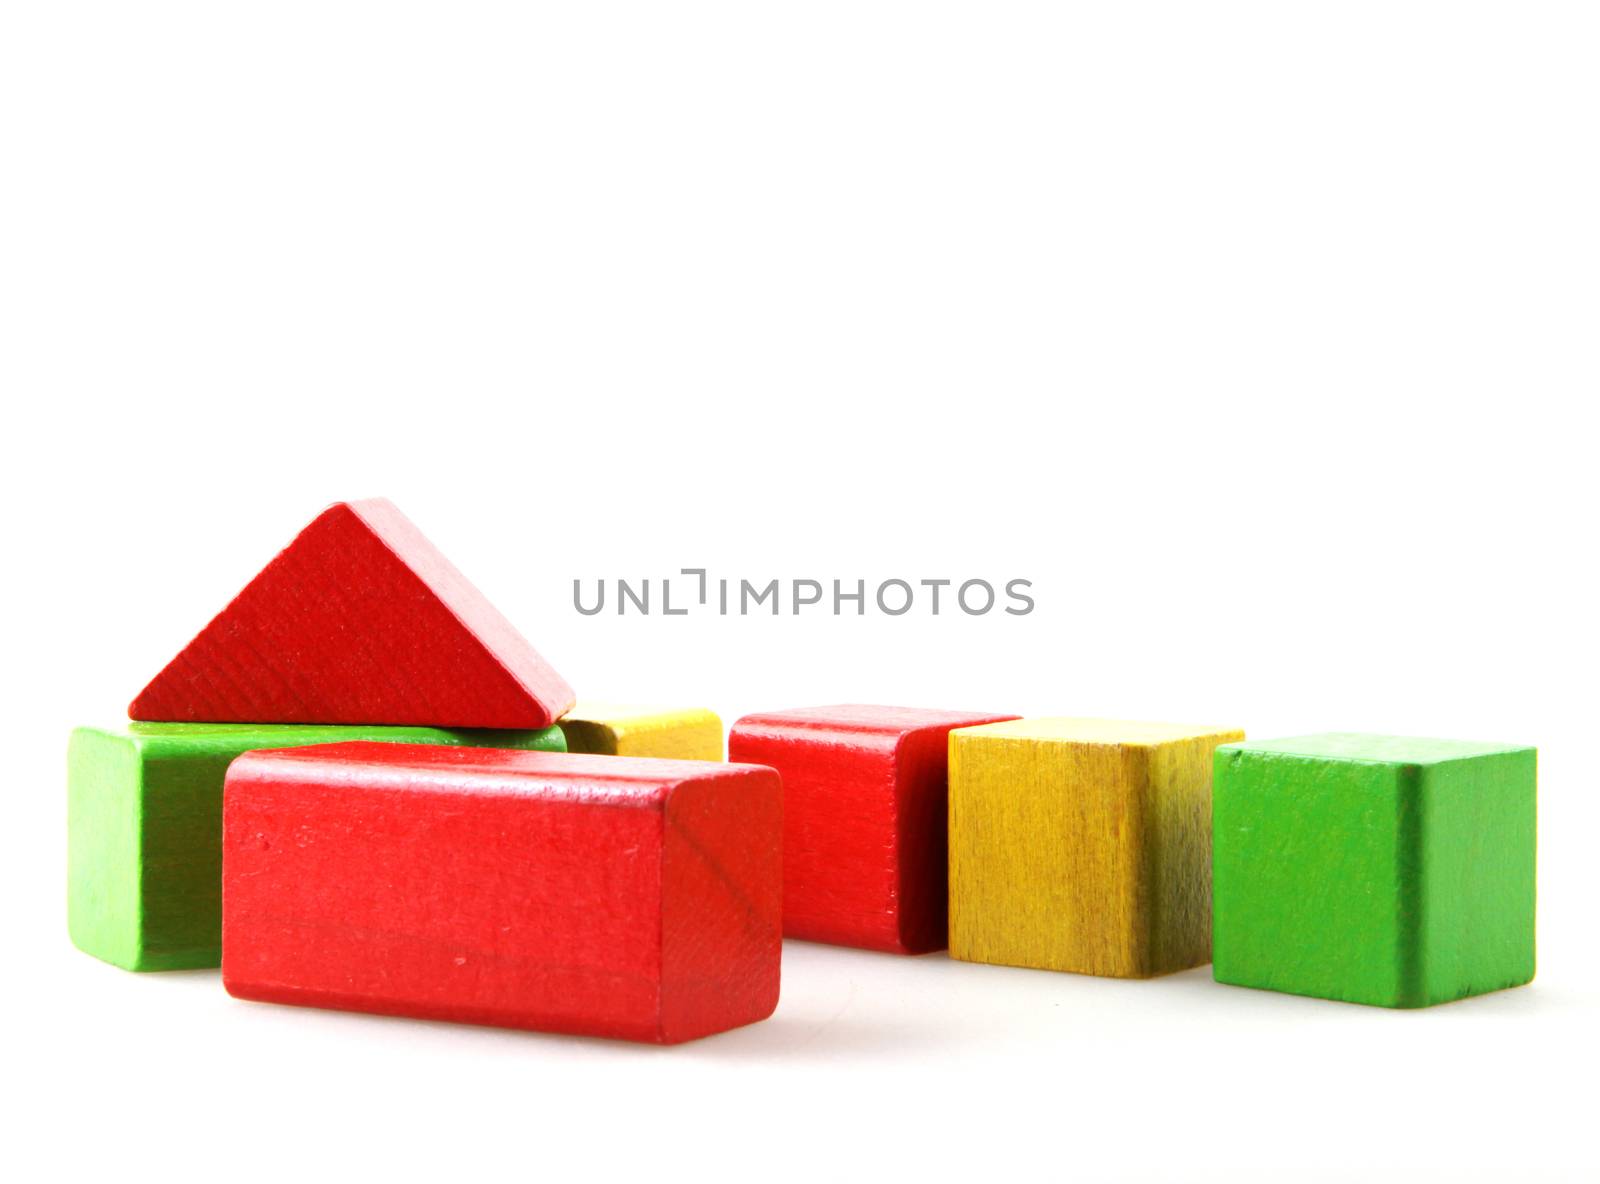 Colorful Wooden Blocks Isolated On White Background by nenovbrothers